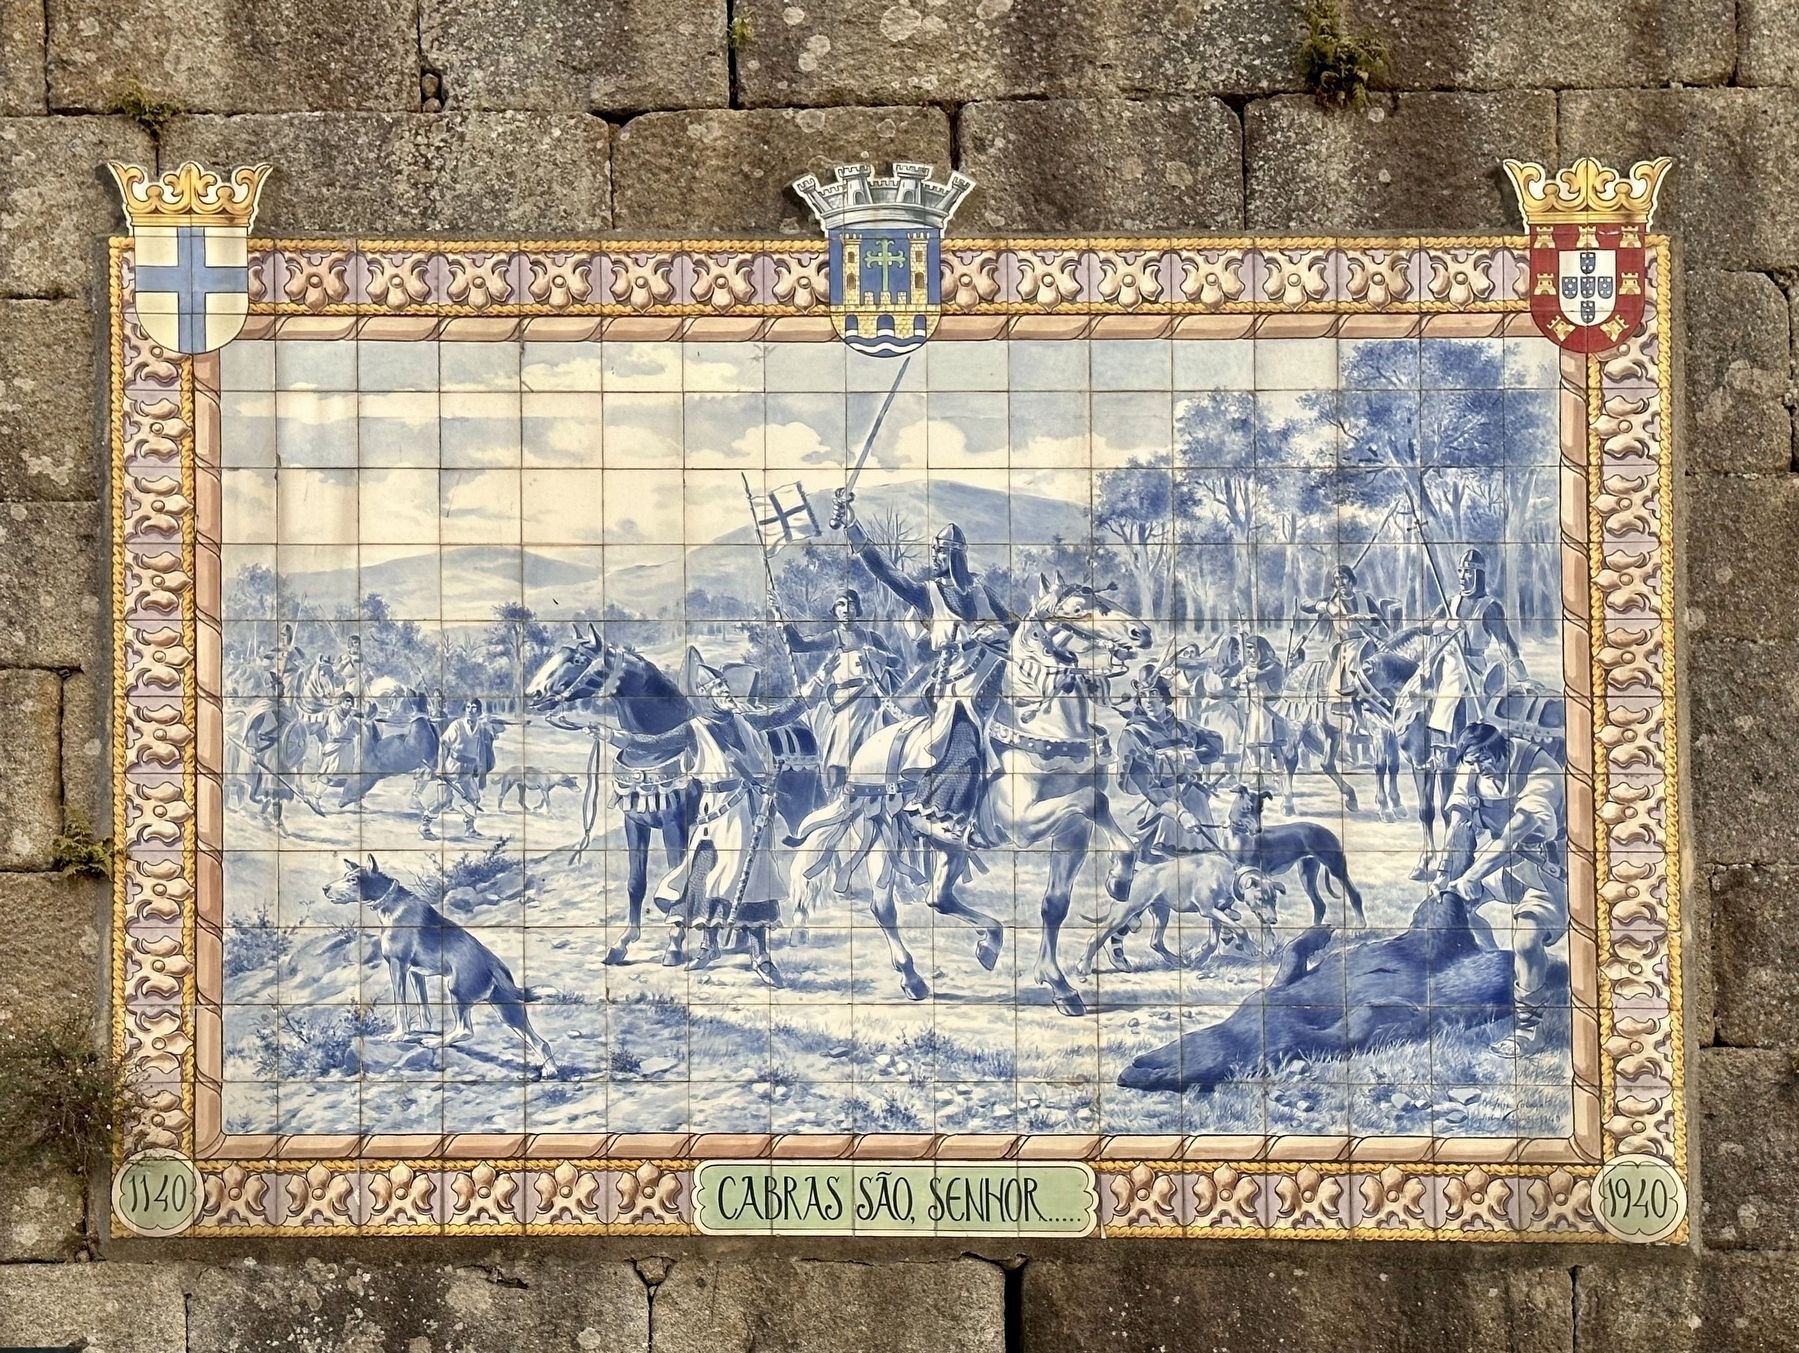 Cabras So, Senhor azulejo panel by Jorge Colao image. Click for full size.